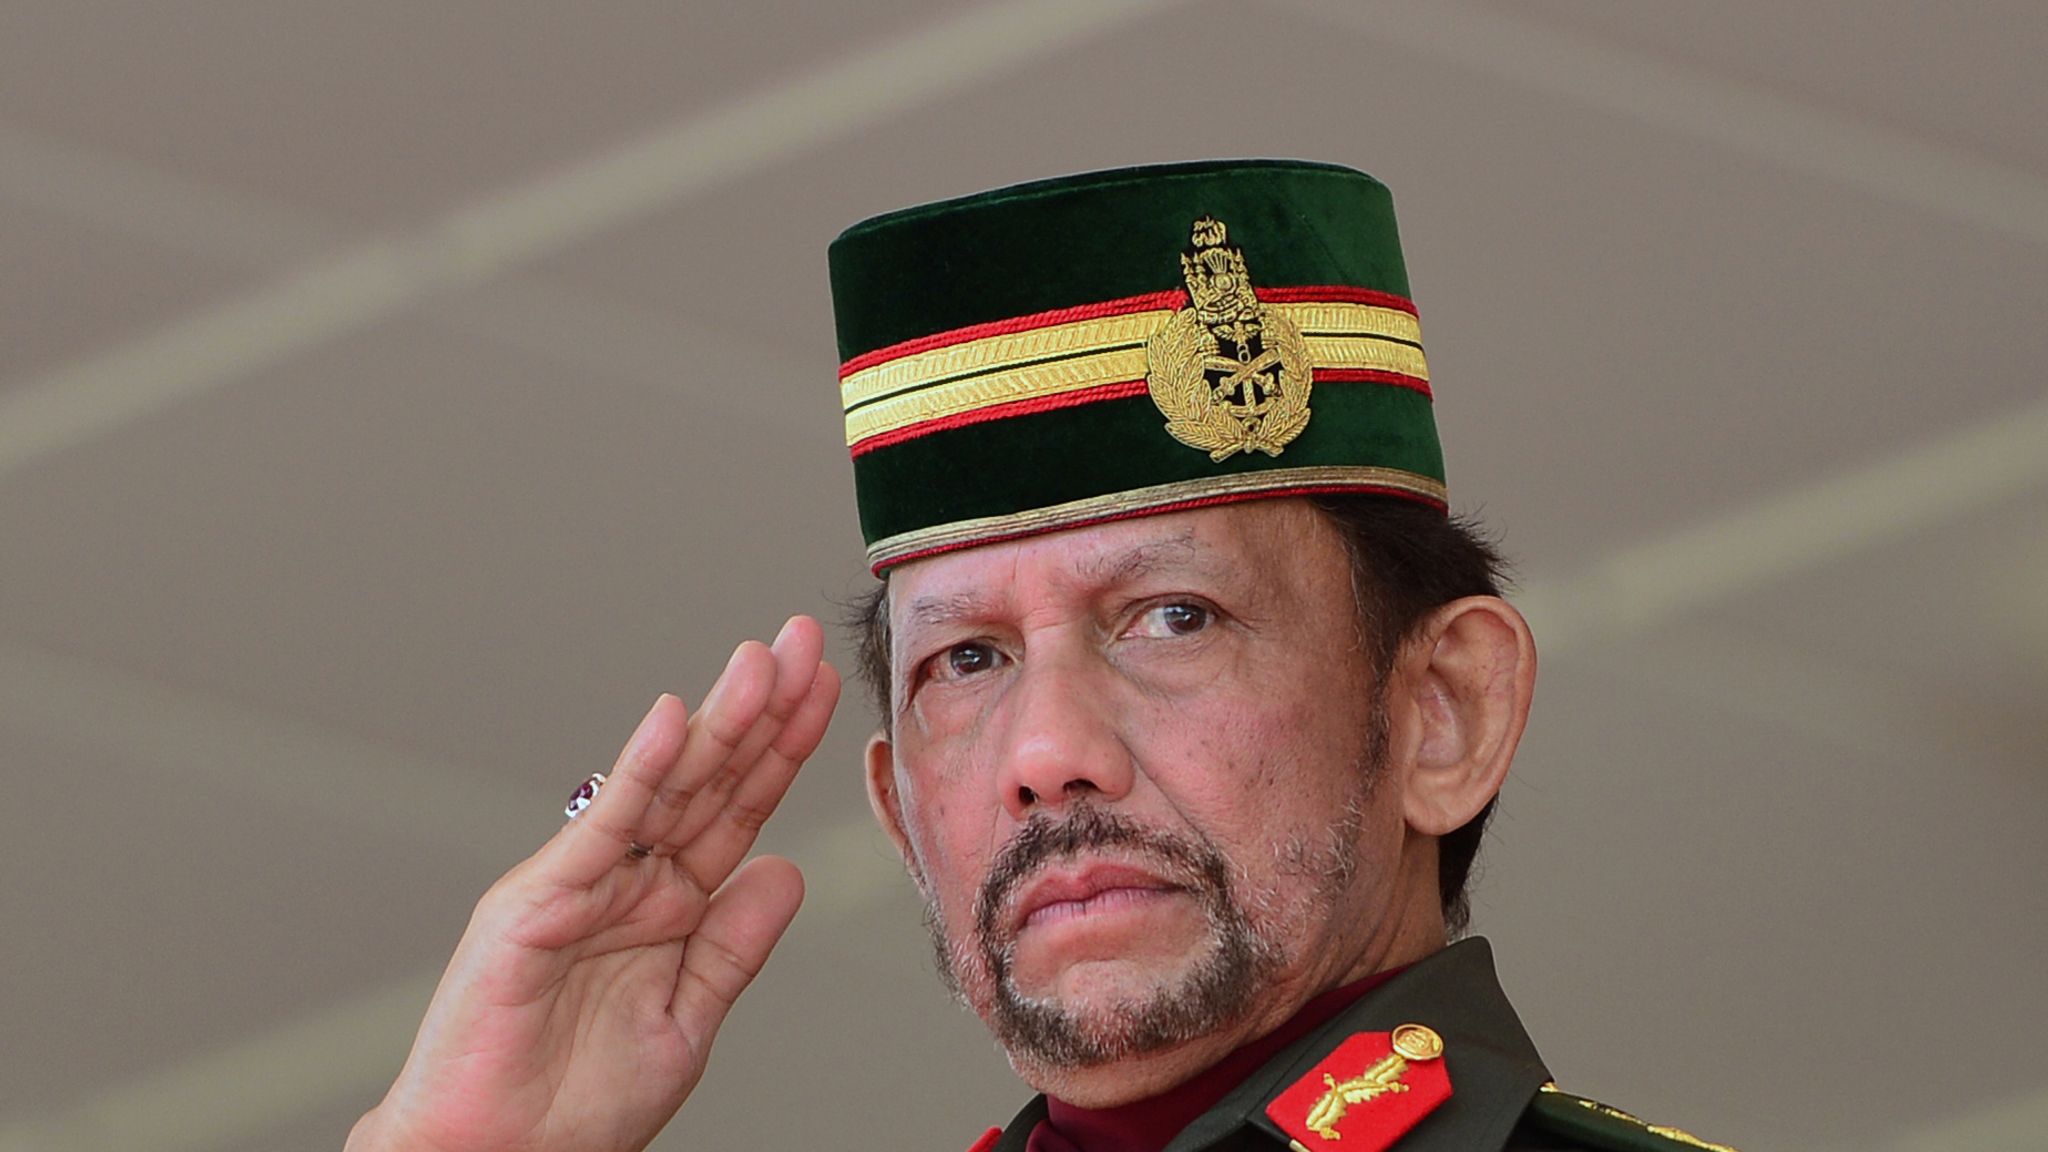 Brunei Owned Hotels Take Down Social Media Accounts Amid Backlash Over